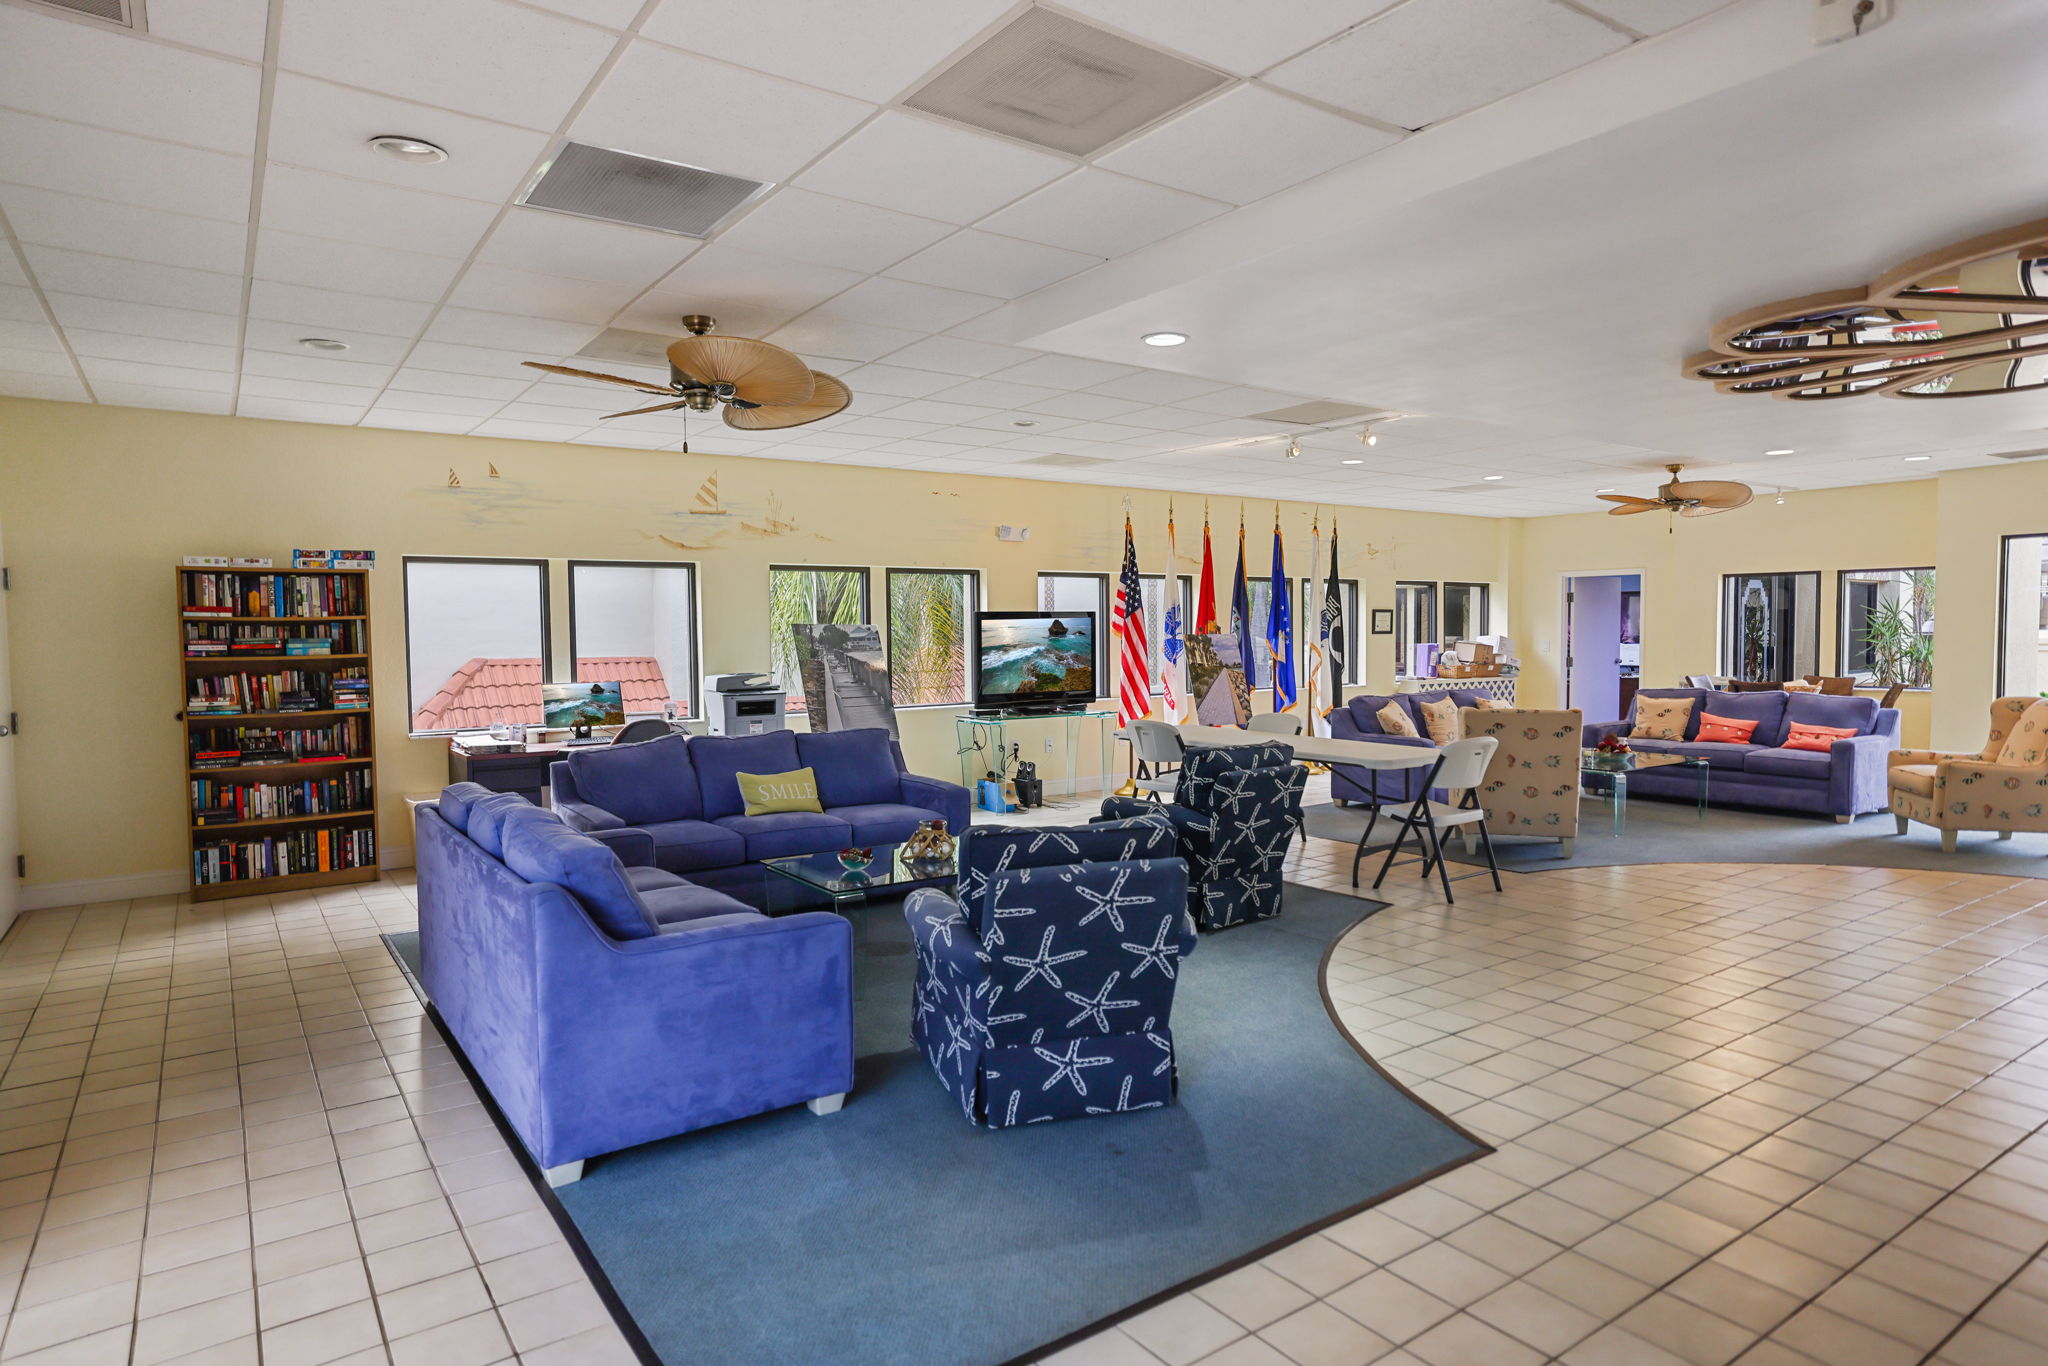 Community Clubhouse Interior - 495A5741 (1)